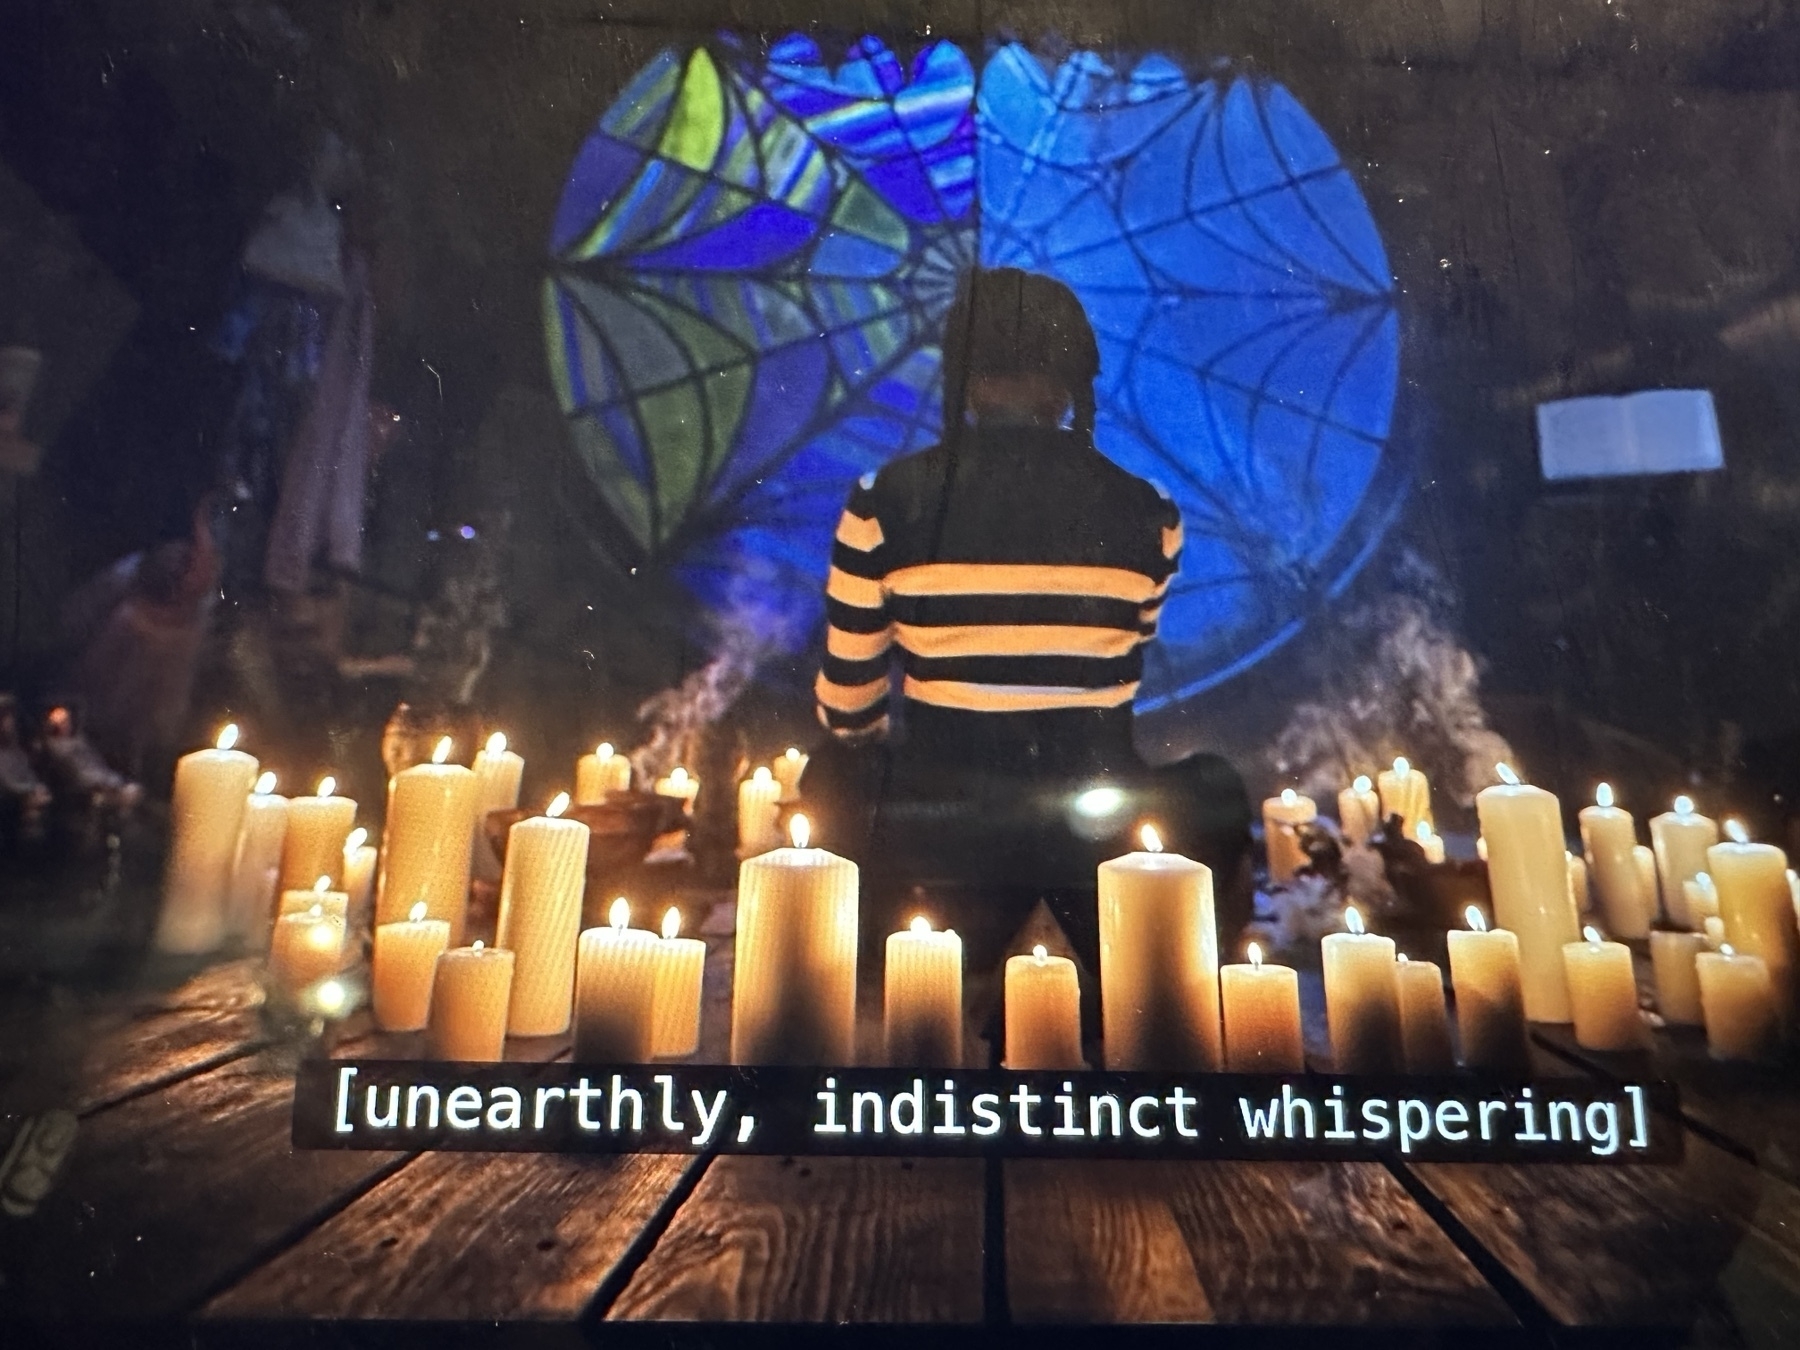 Still from "Wednesday" with subtitle [unearthly, indistinct whispering]